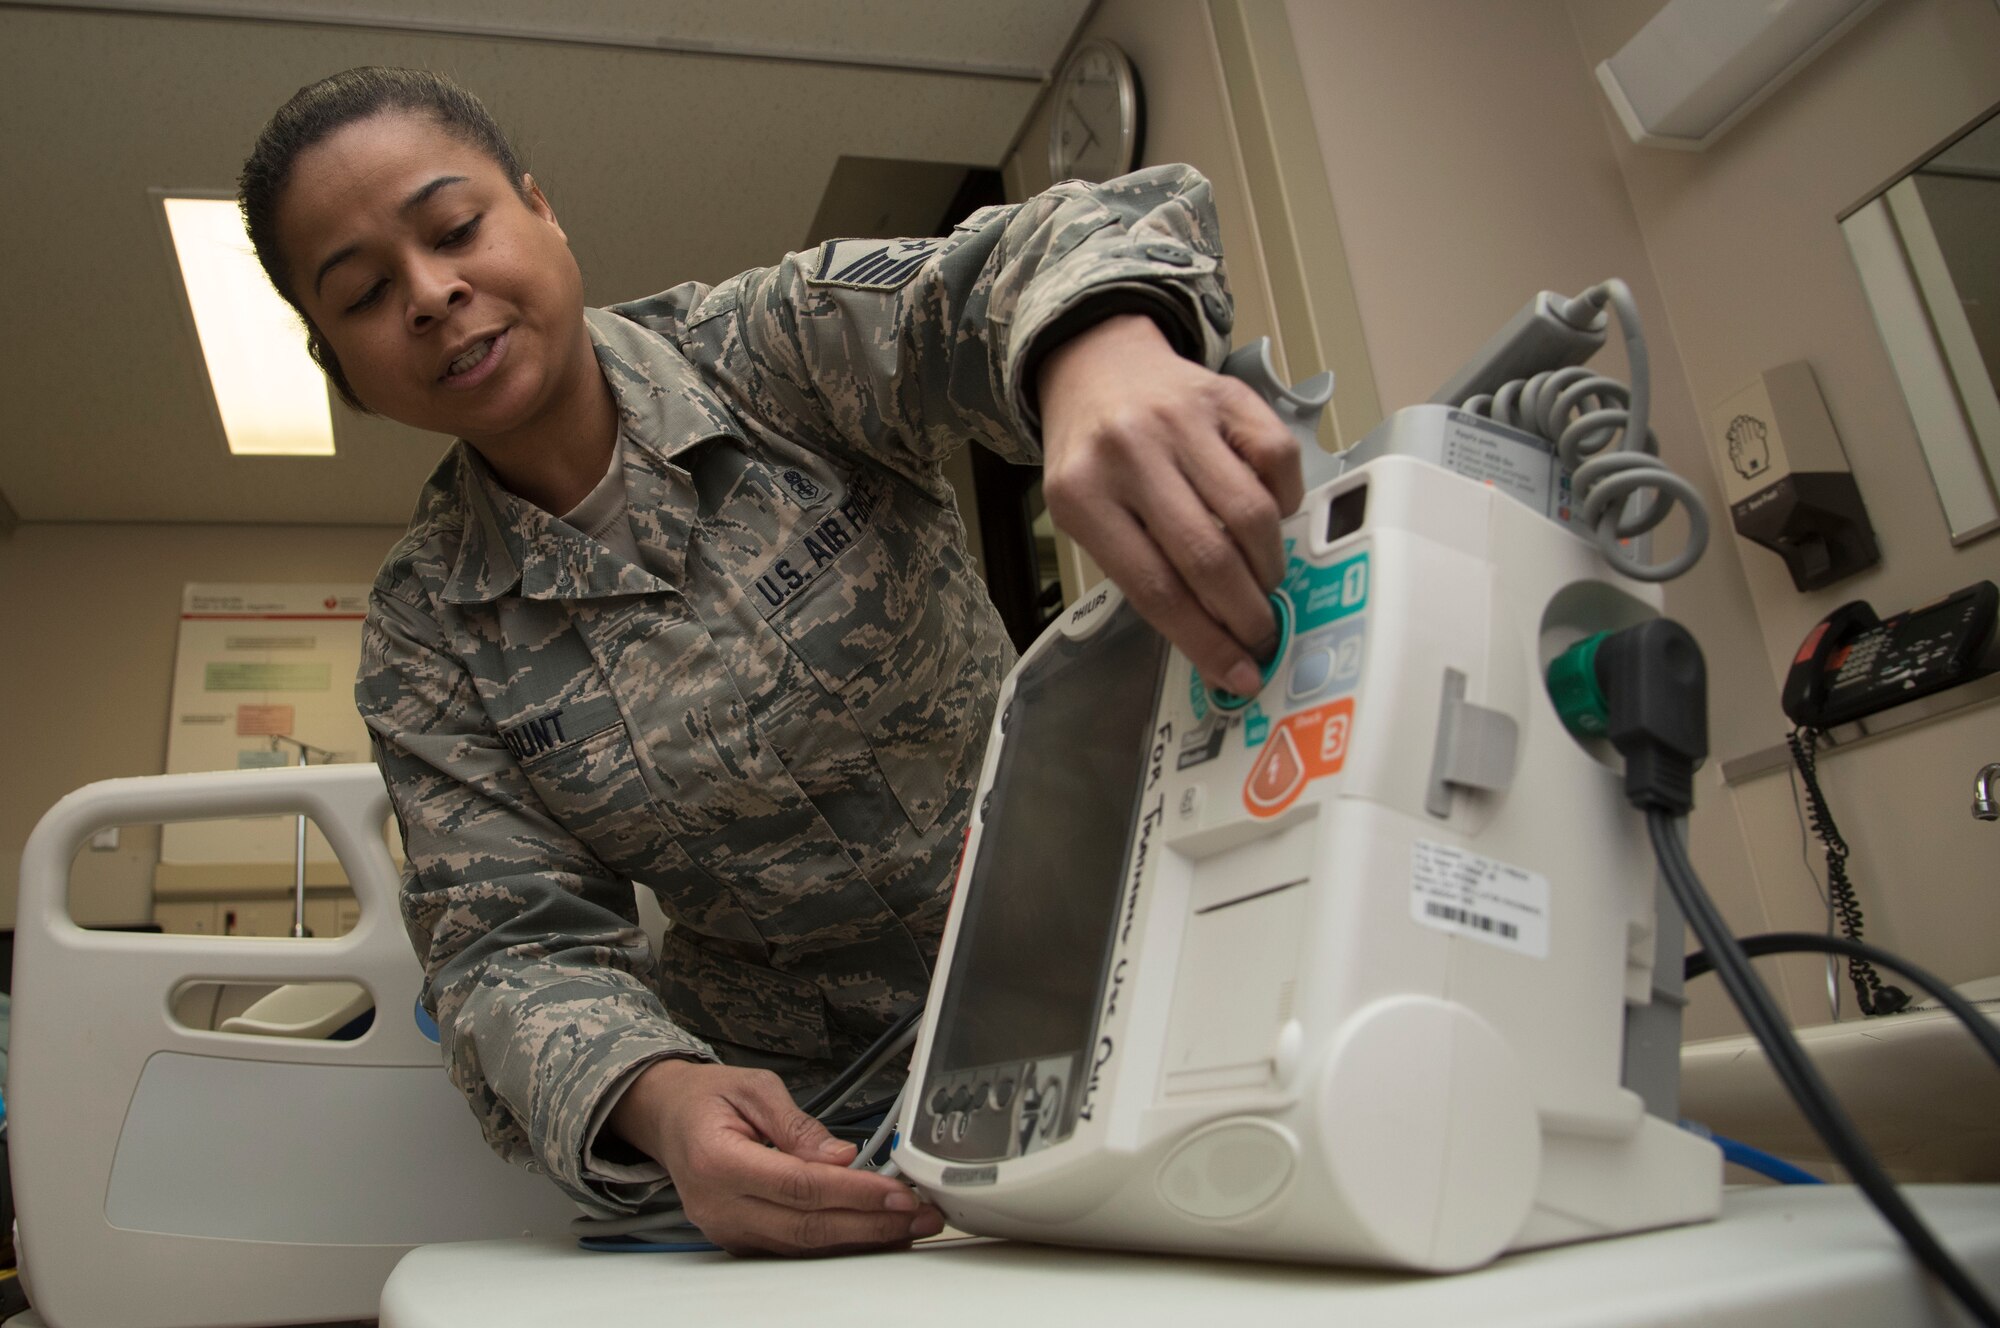 U.S. Air Force Master Sgt. Charlene Blunt, the 35th Medical Group education and training flight chief, powers on a Philips HeartStart MRx defibrillator and heart monitor during training at Misawa Air Base, Japan, Feb. 3, 2017. According to Blunt any personnel who come into physical contact with patients are required to know how to use all types of automated external defibrillator machines and know the basics of CPR. (U.S. Air Force photo by Airman 1st Class Sadie Colbert)